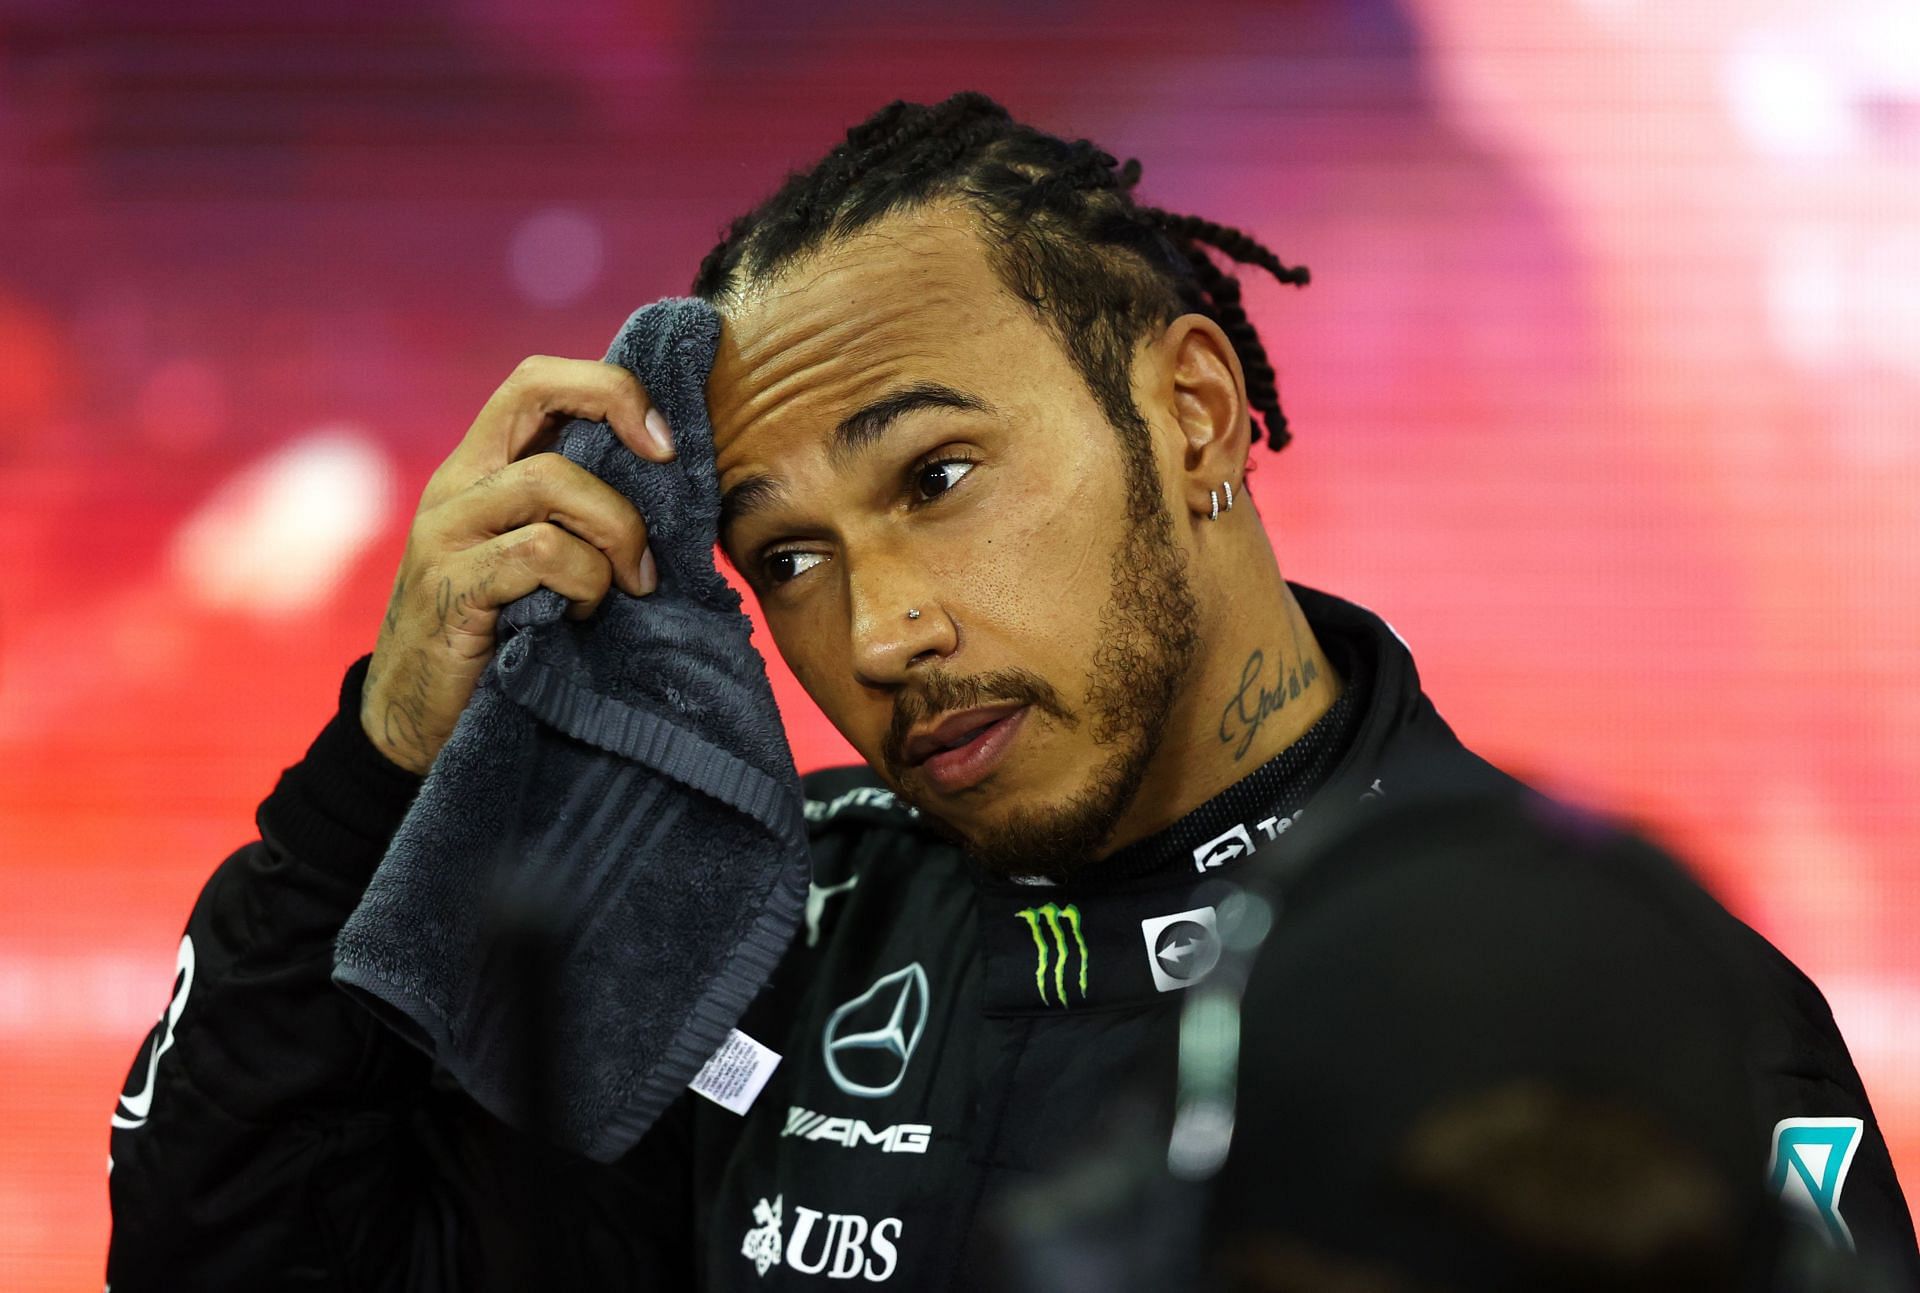 Mercedes might look beyond Lewis Hamilton in the coming future